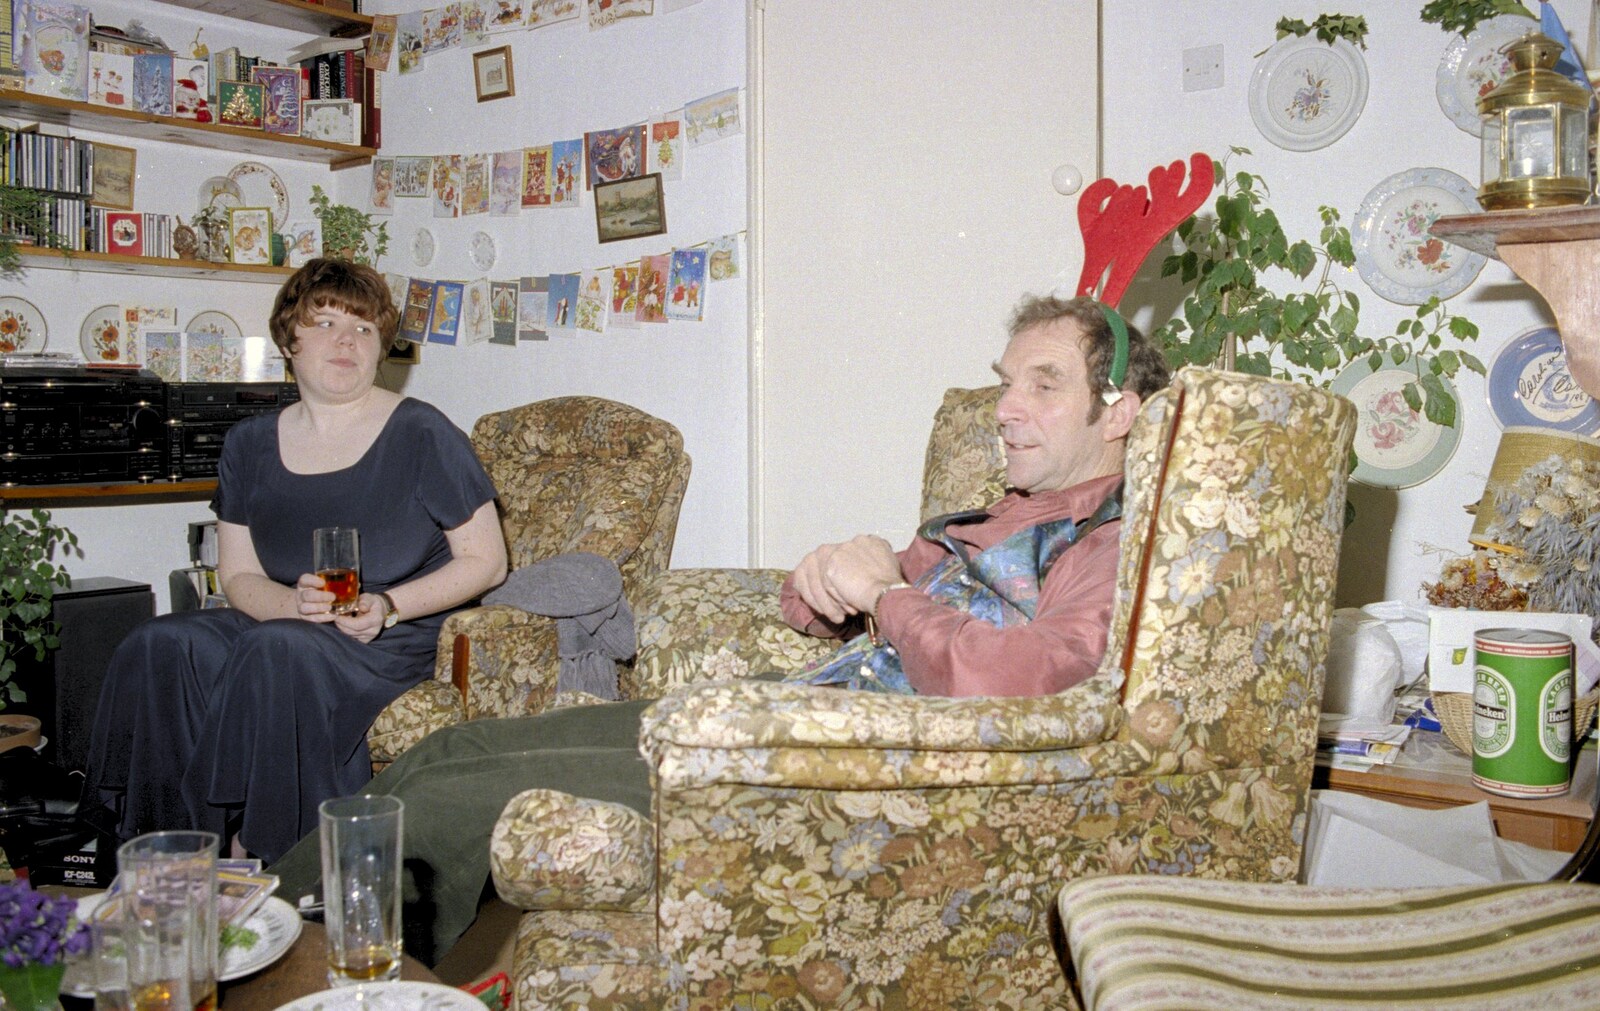 Sis looks over to Mike from Christmas Down South, Burton and Walkford, Dorset - 25th December 1994